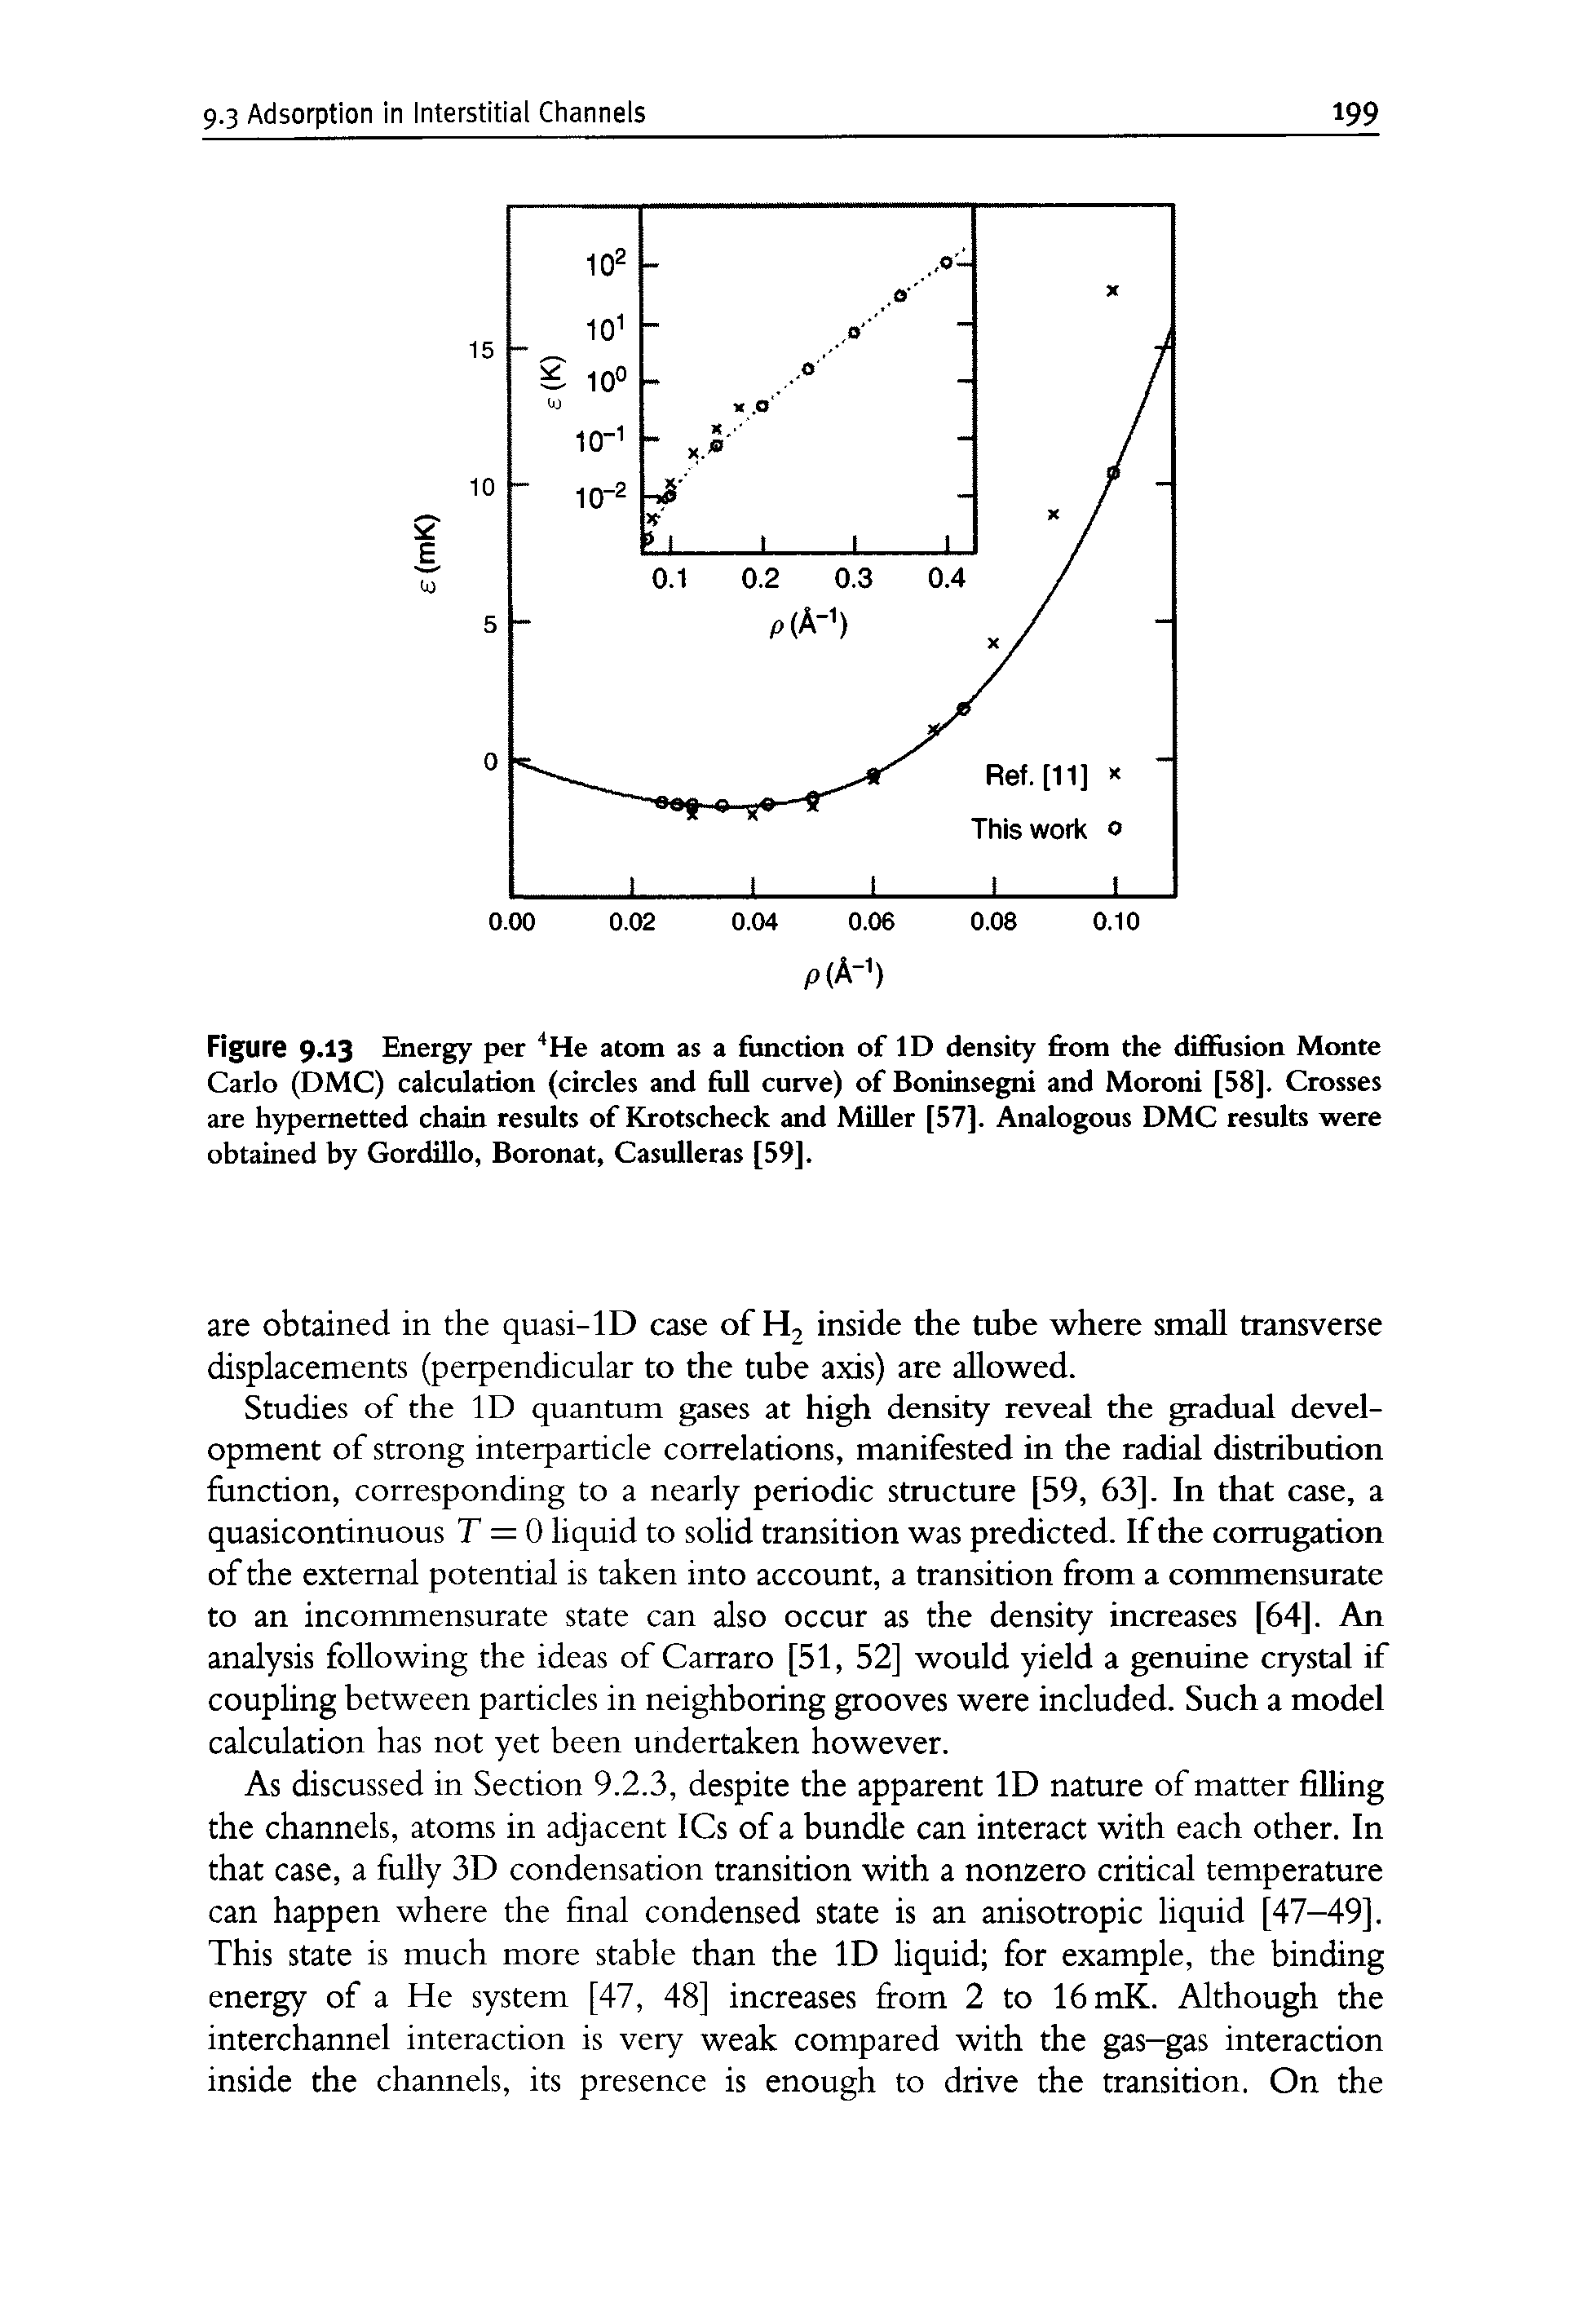 Figure 9.13 Energy per He atom as a fiinction of ID density from the diffusion Monte Carlo (DMC) calculation (circles and foil curve) of Boninsegni and Moroni [58]. Crosses are hypemetted chain results of Krotscheck and Miller [57]. Analogous DMC results were obtained by Gordillo, Boronat, Casulleras [59].